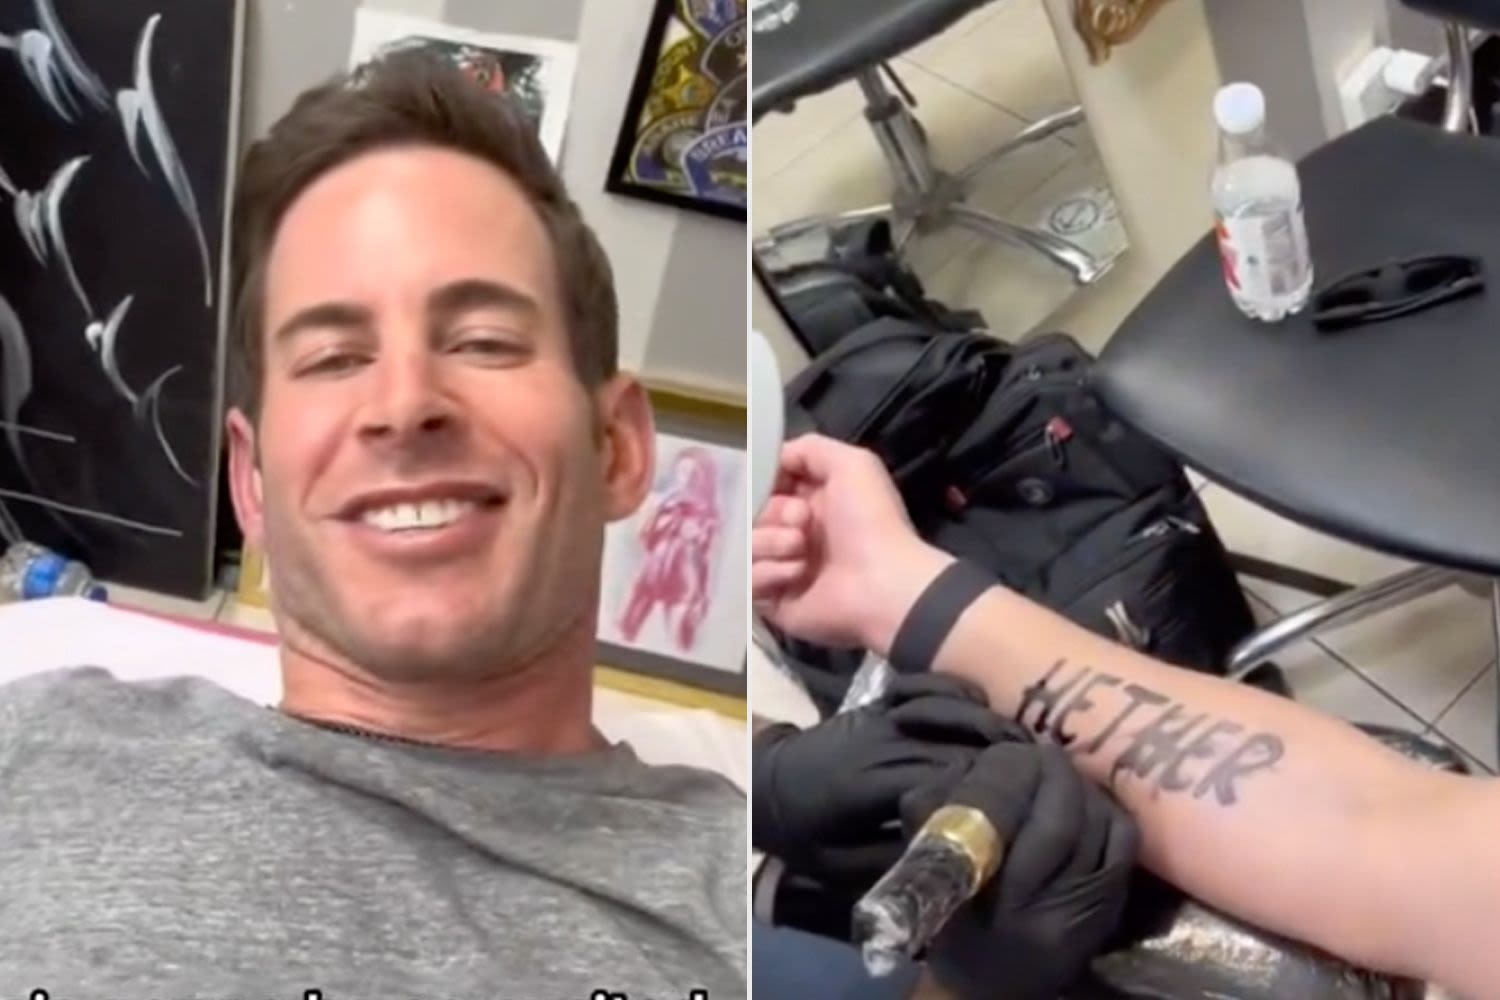 Tarek El Moussa Jokes He Got a Tattoo of His Wife Heather's Name with a Misspelling — and Fans Fall for It!